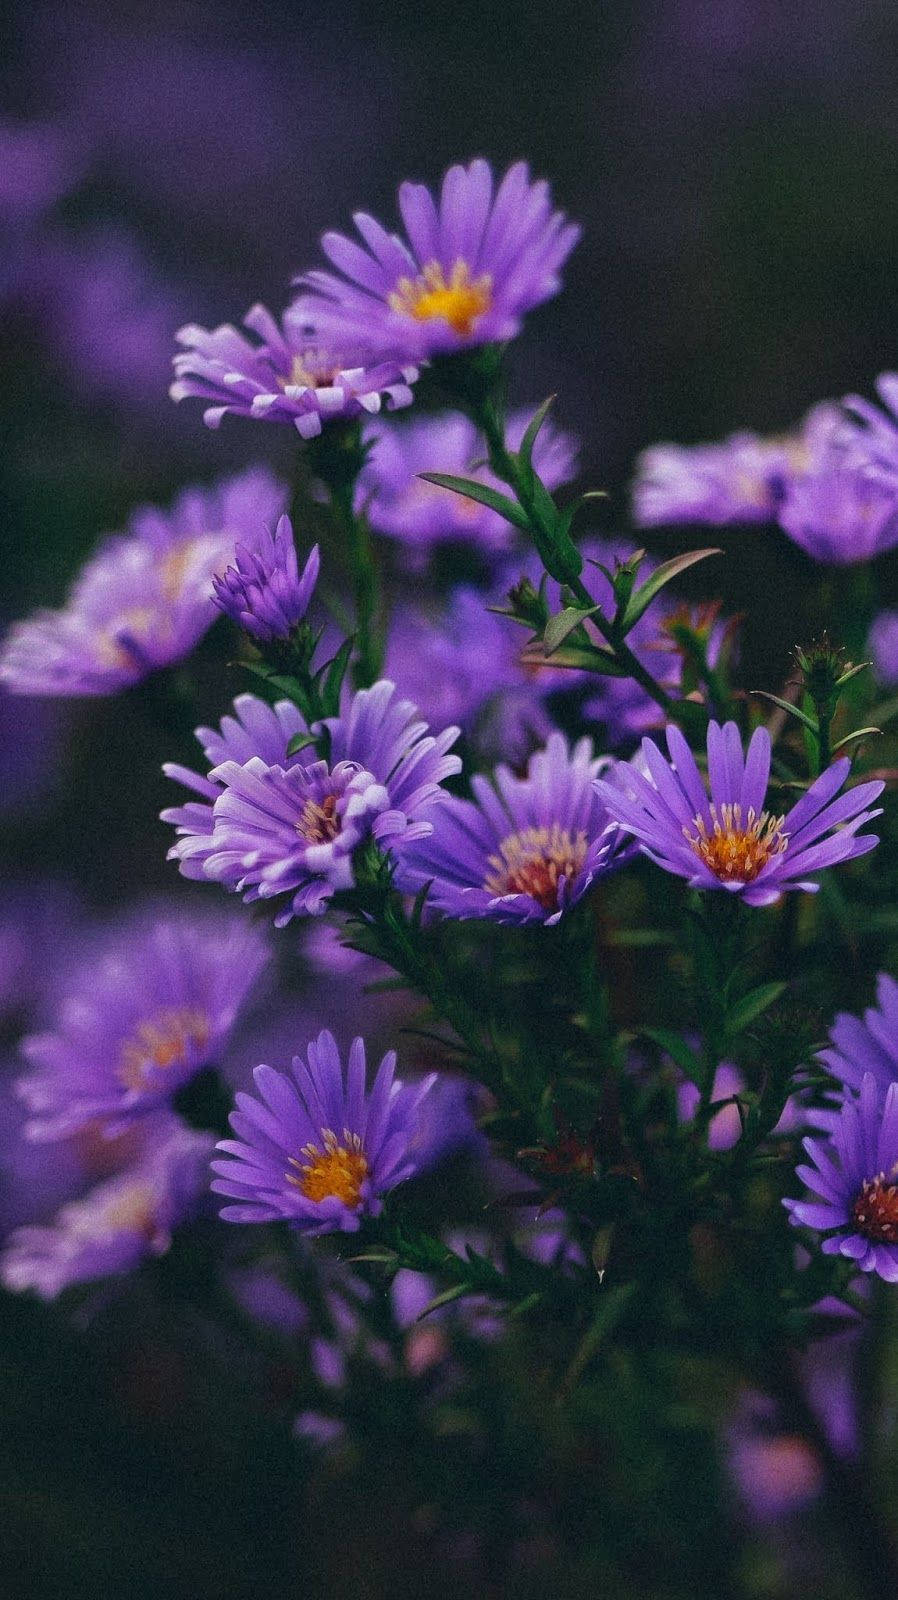 Download Aesthetic Purple Flower in Close-up. Wallpaper | Wallpapers.com